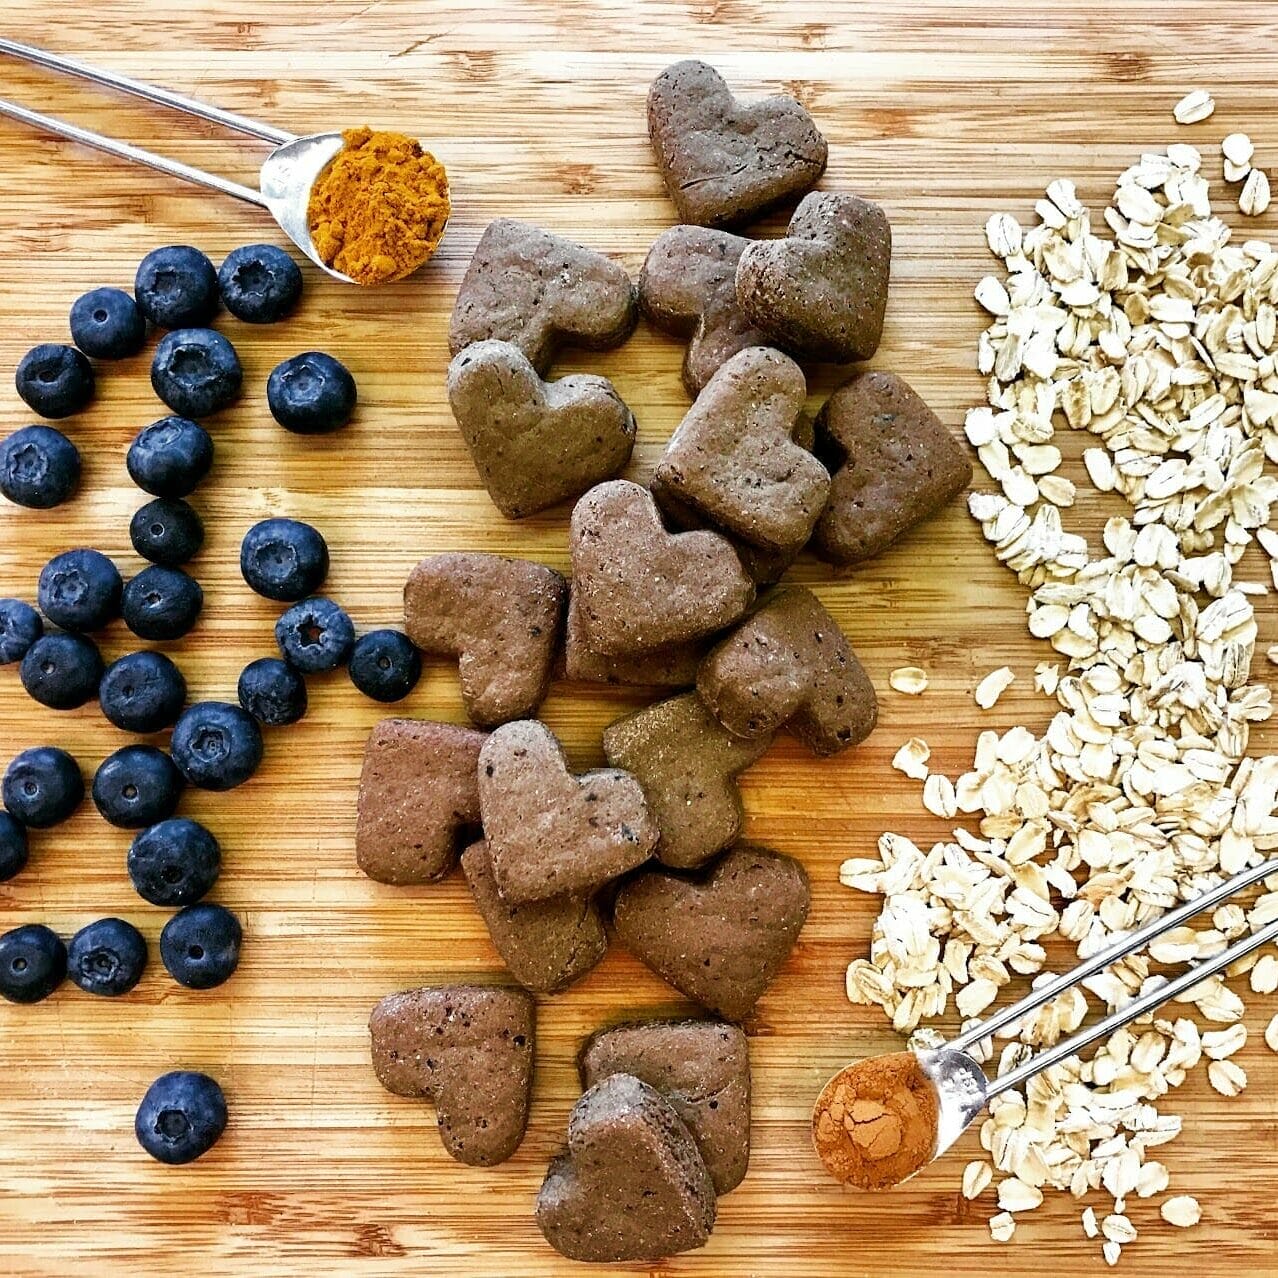 ingredients spread out on a cutting board. Blueberries, oats, turmeric, and cinnamon are healthy ingredients pet owners can look for in dog food.